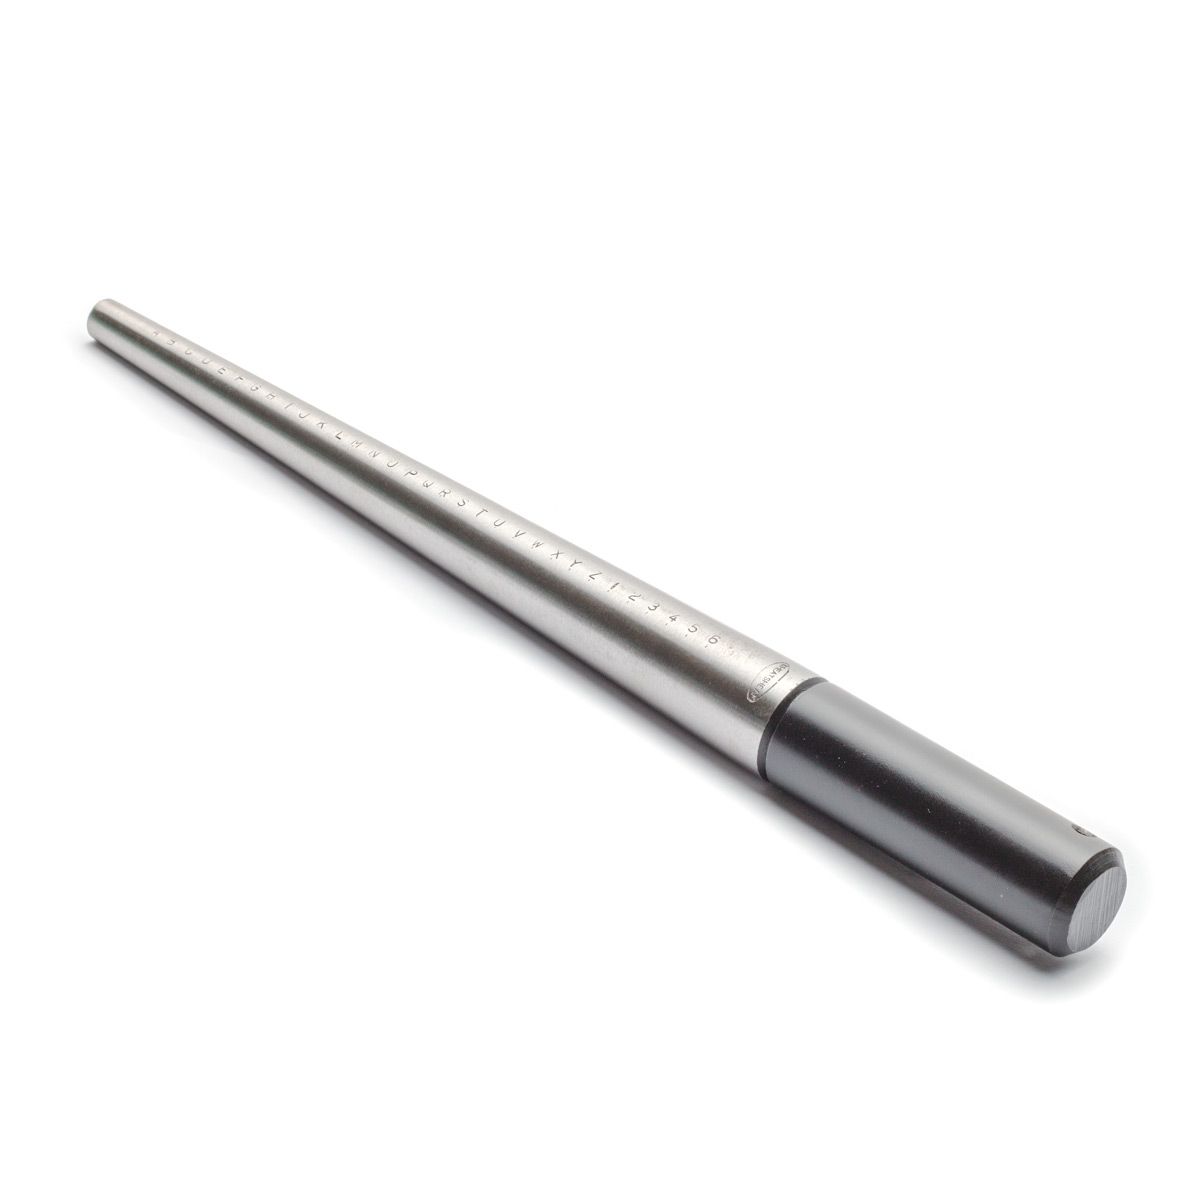 Giant Ring Mandrel - Jewelry Mandrel, Jewelry Making Supplies